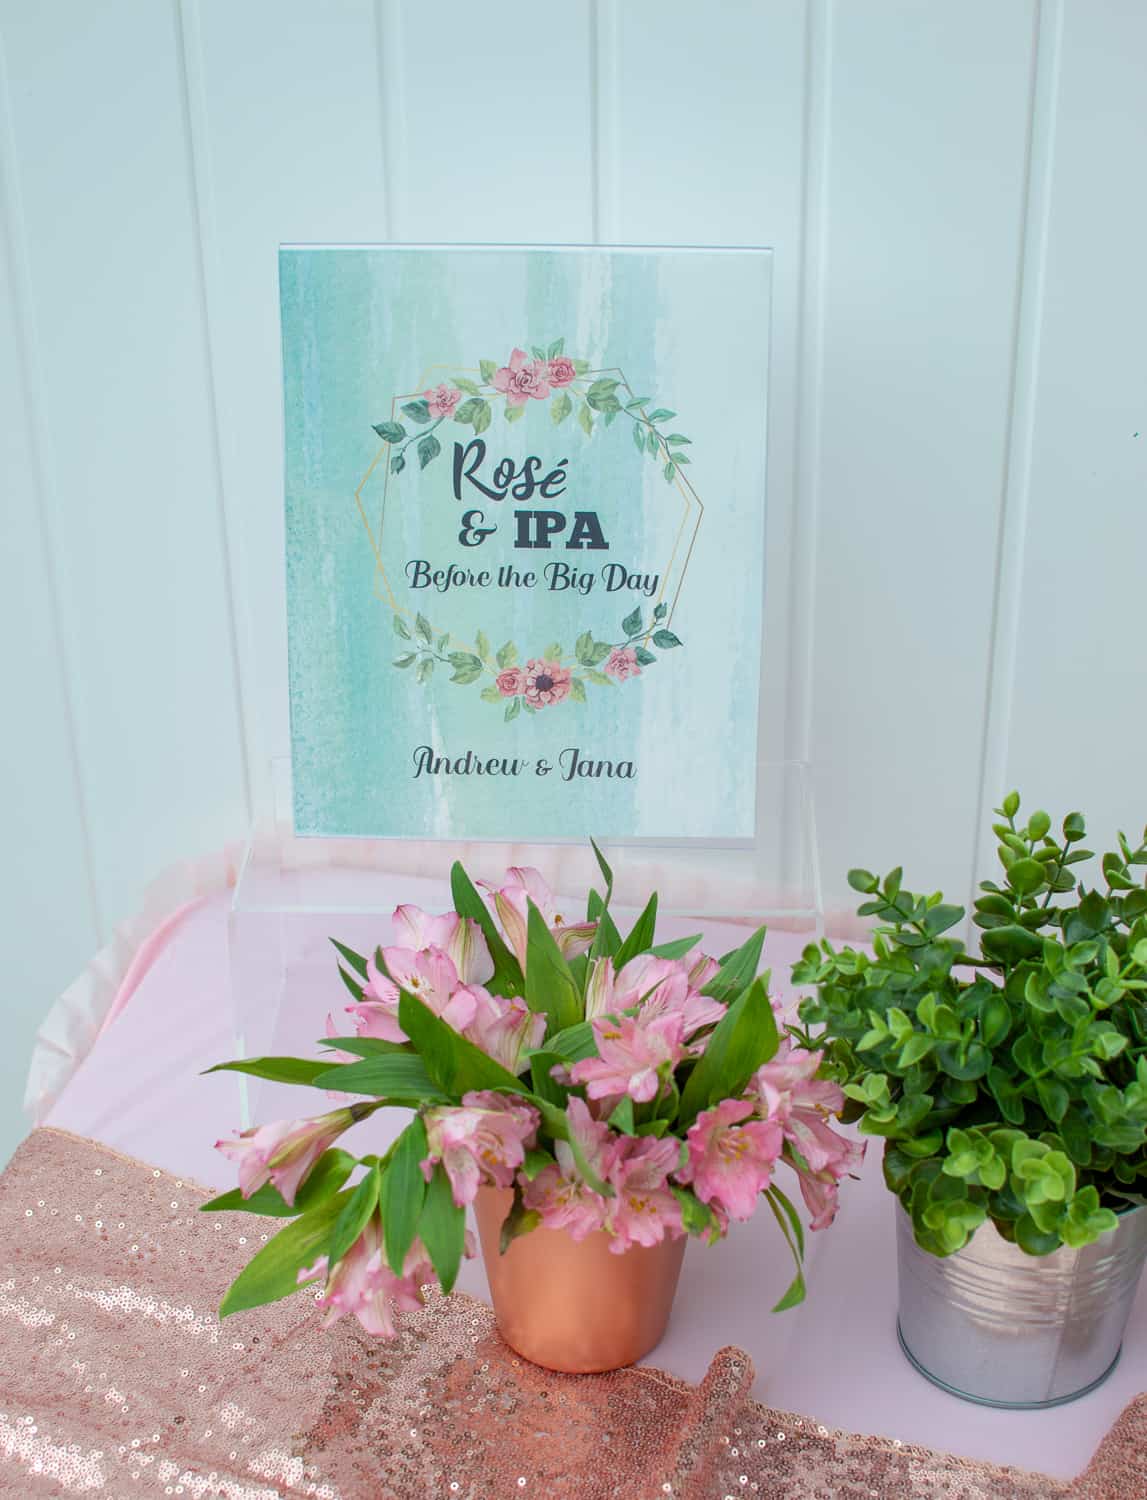 Rosé and IPA party sign along with flowers and greenery 